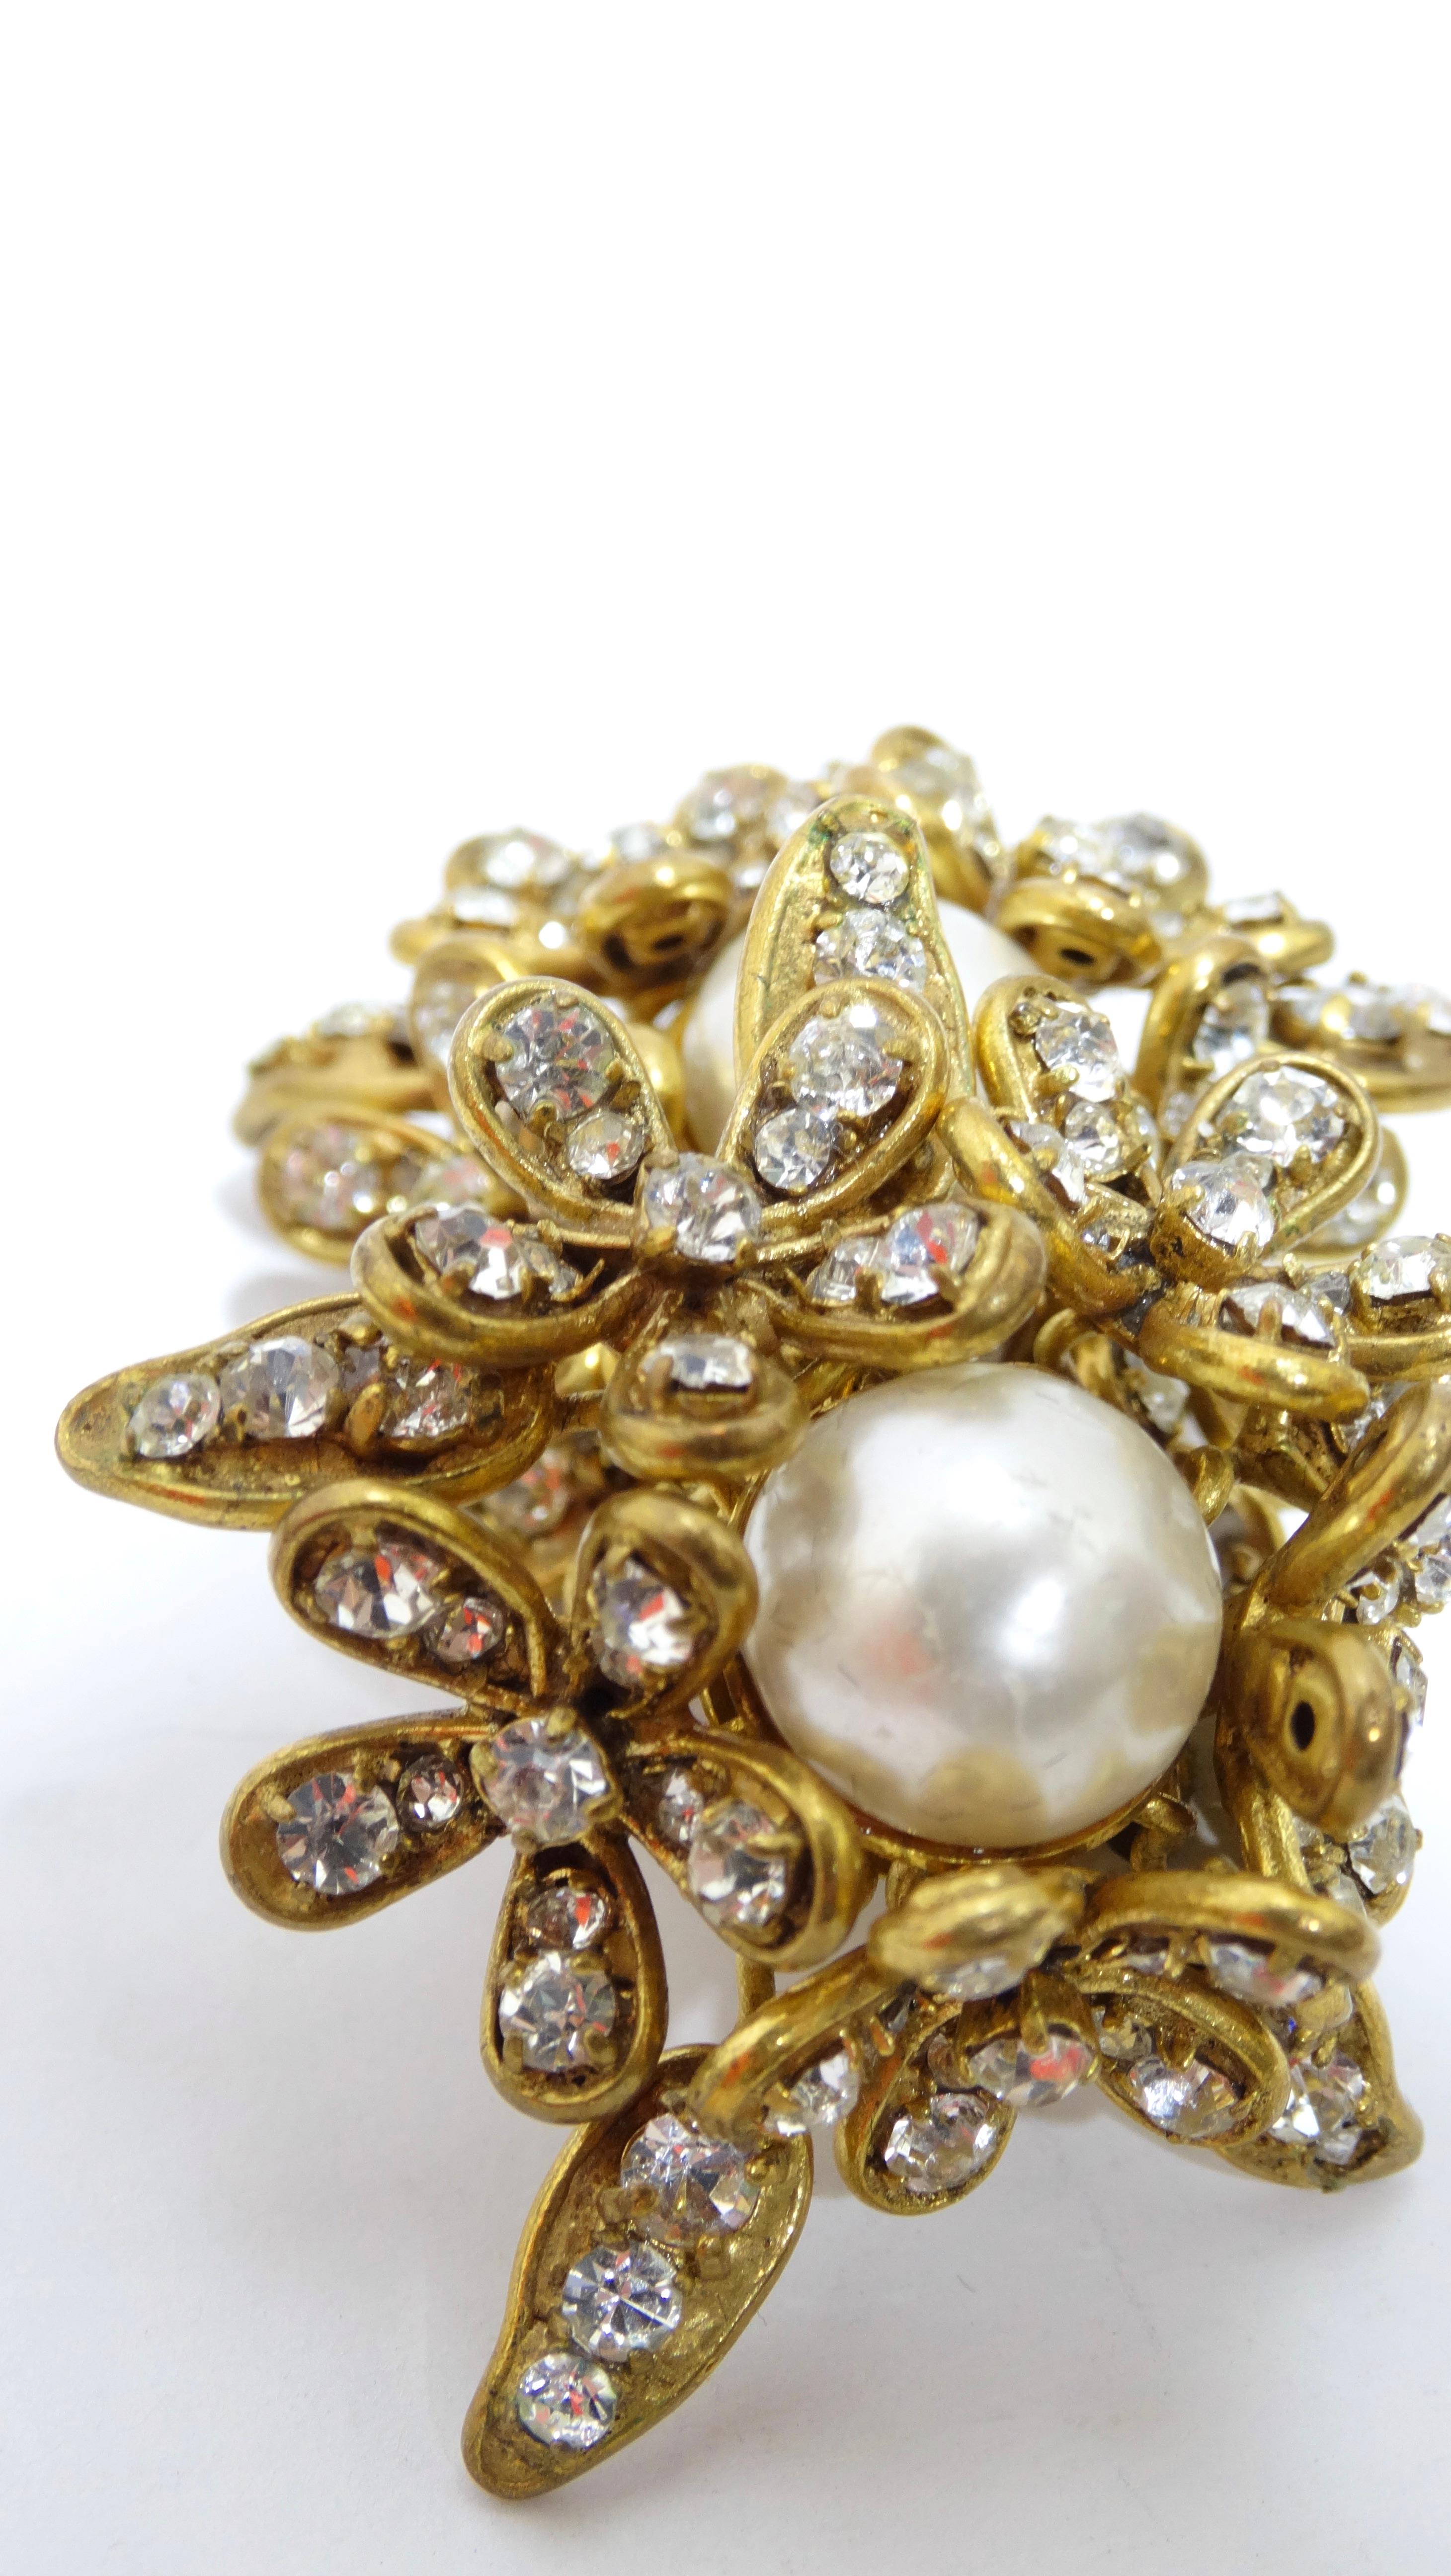 Chanel 1970's Crystal/Pearl Flower Earrings In Excellent Condition For Sale In Scottsdale, AZ